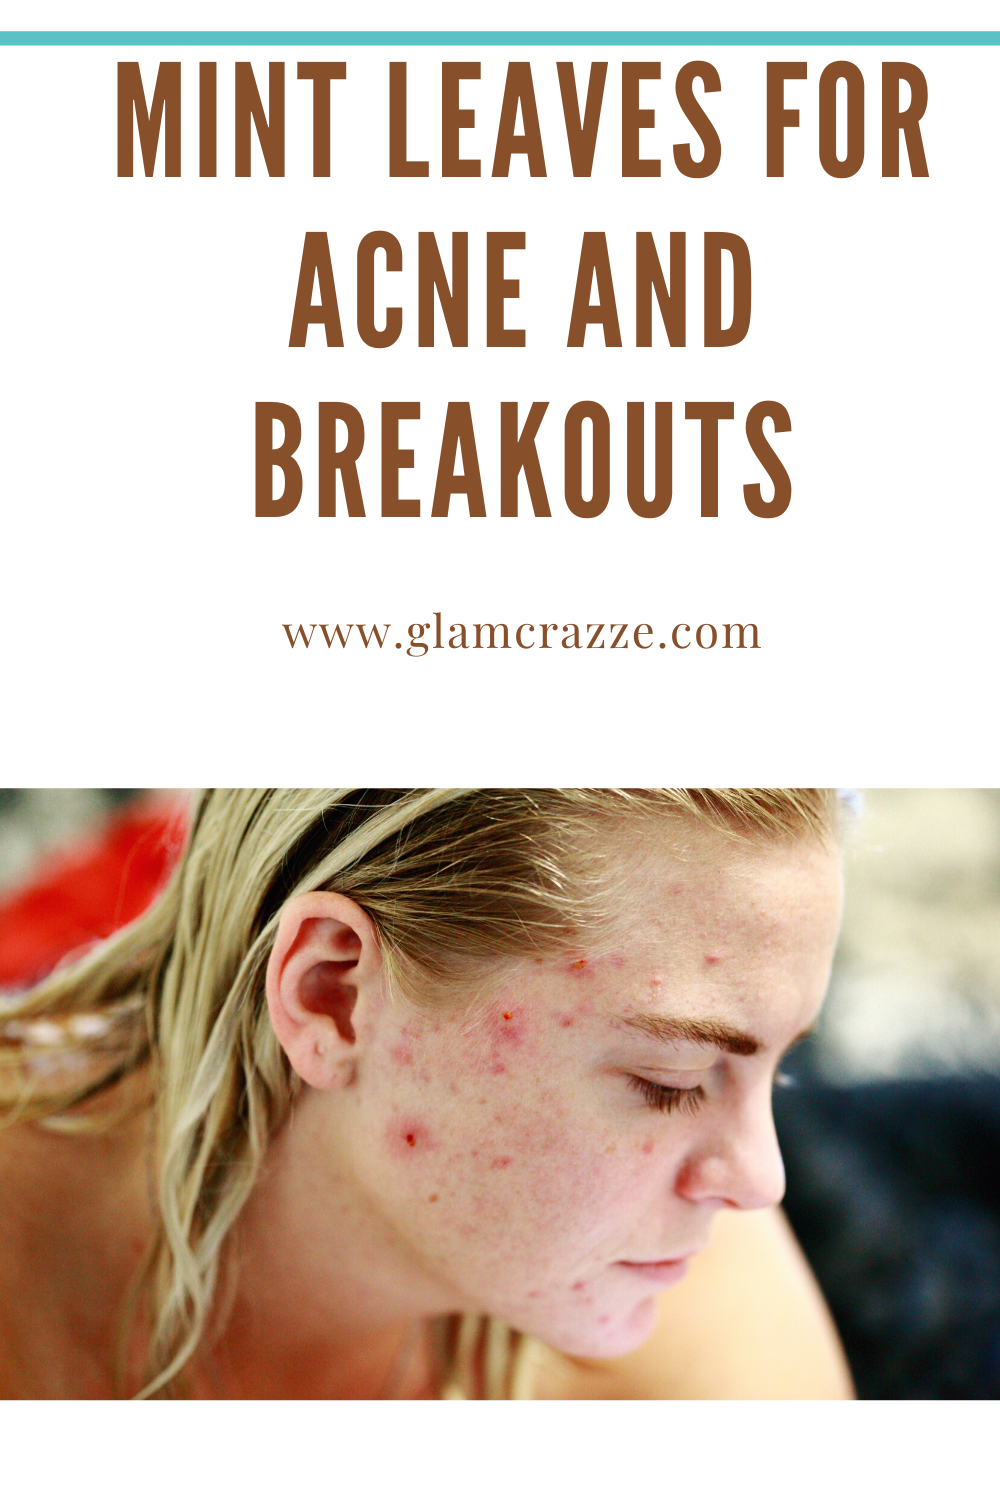 Get rid of acne and achieve clear skin using this home remedies